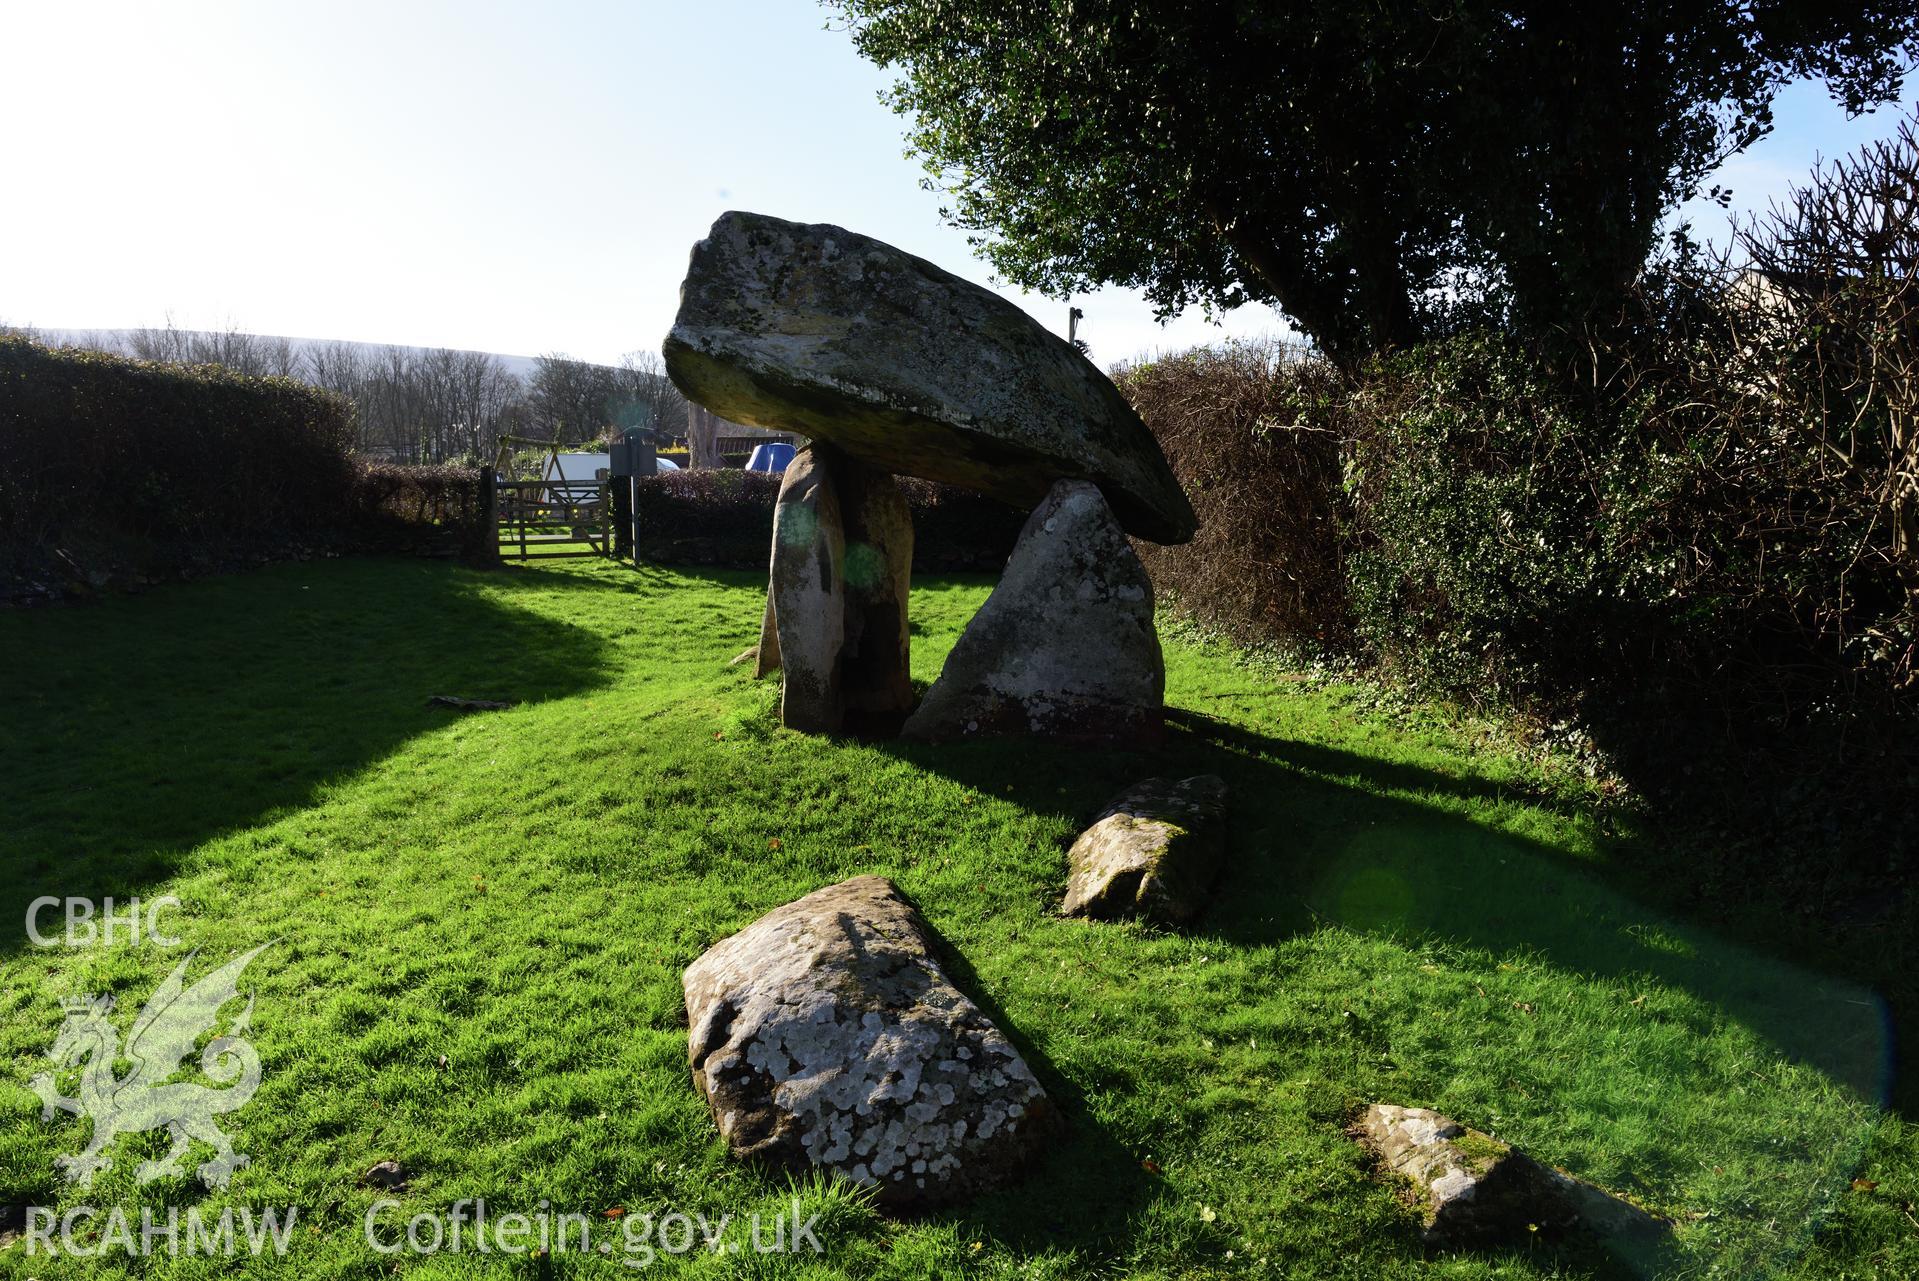 Royal Commission photo survey of Carreg Coetan chambered tomb in winter light, by Toby Driver